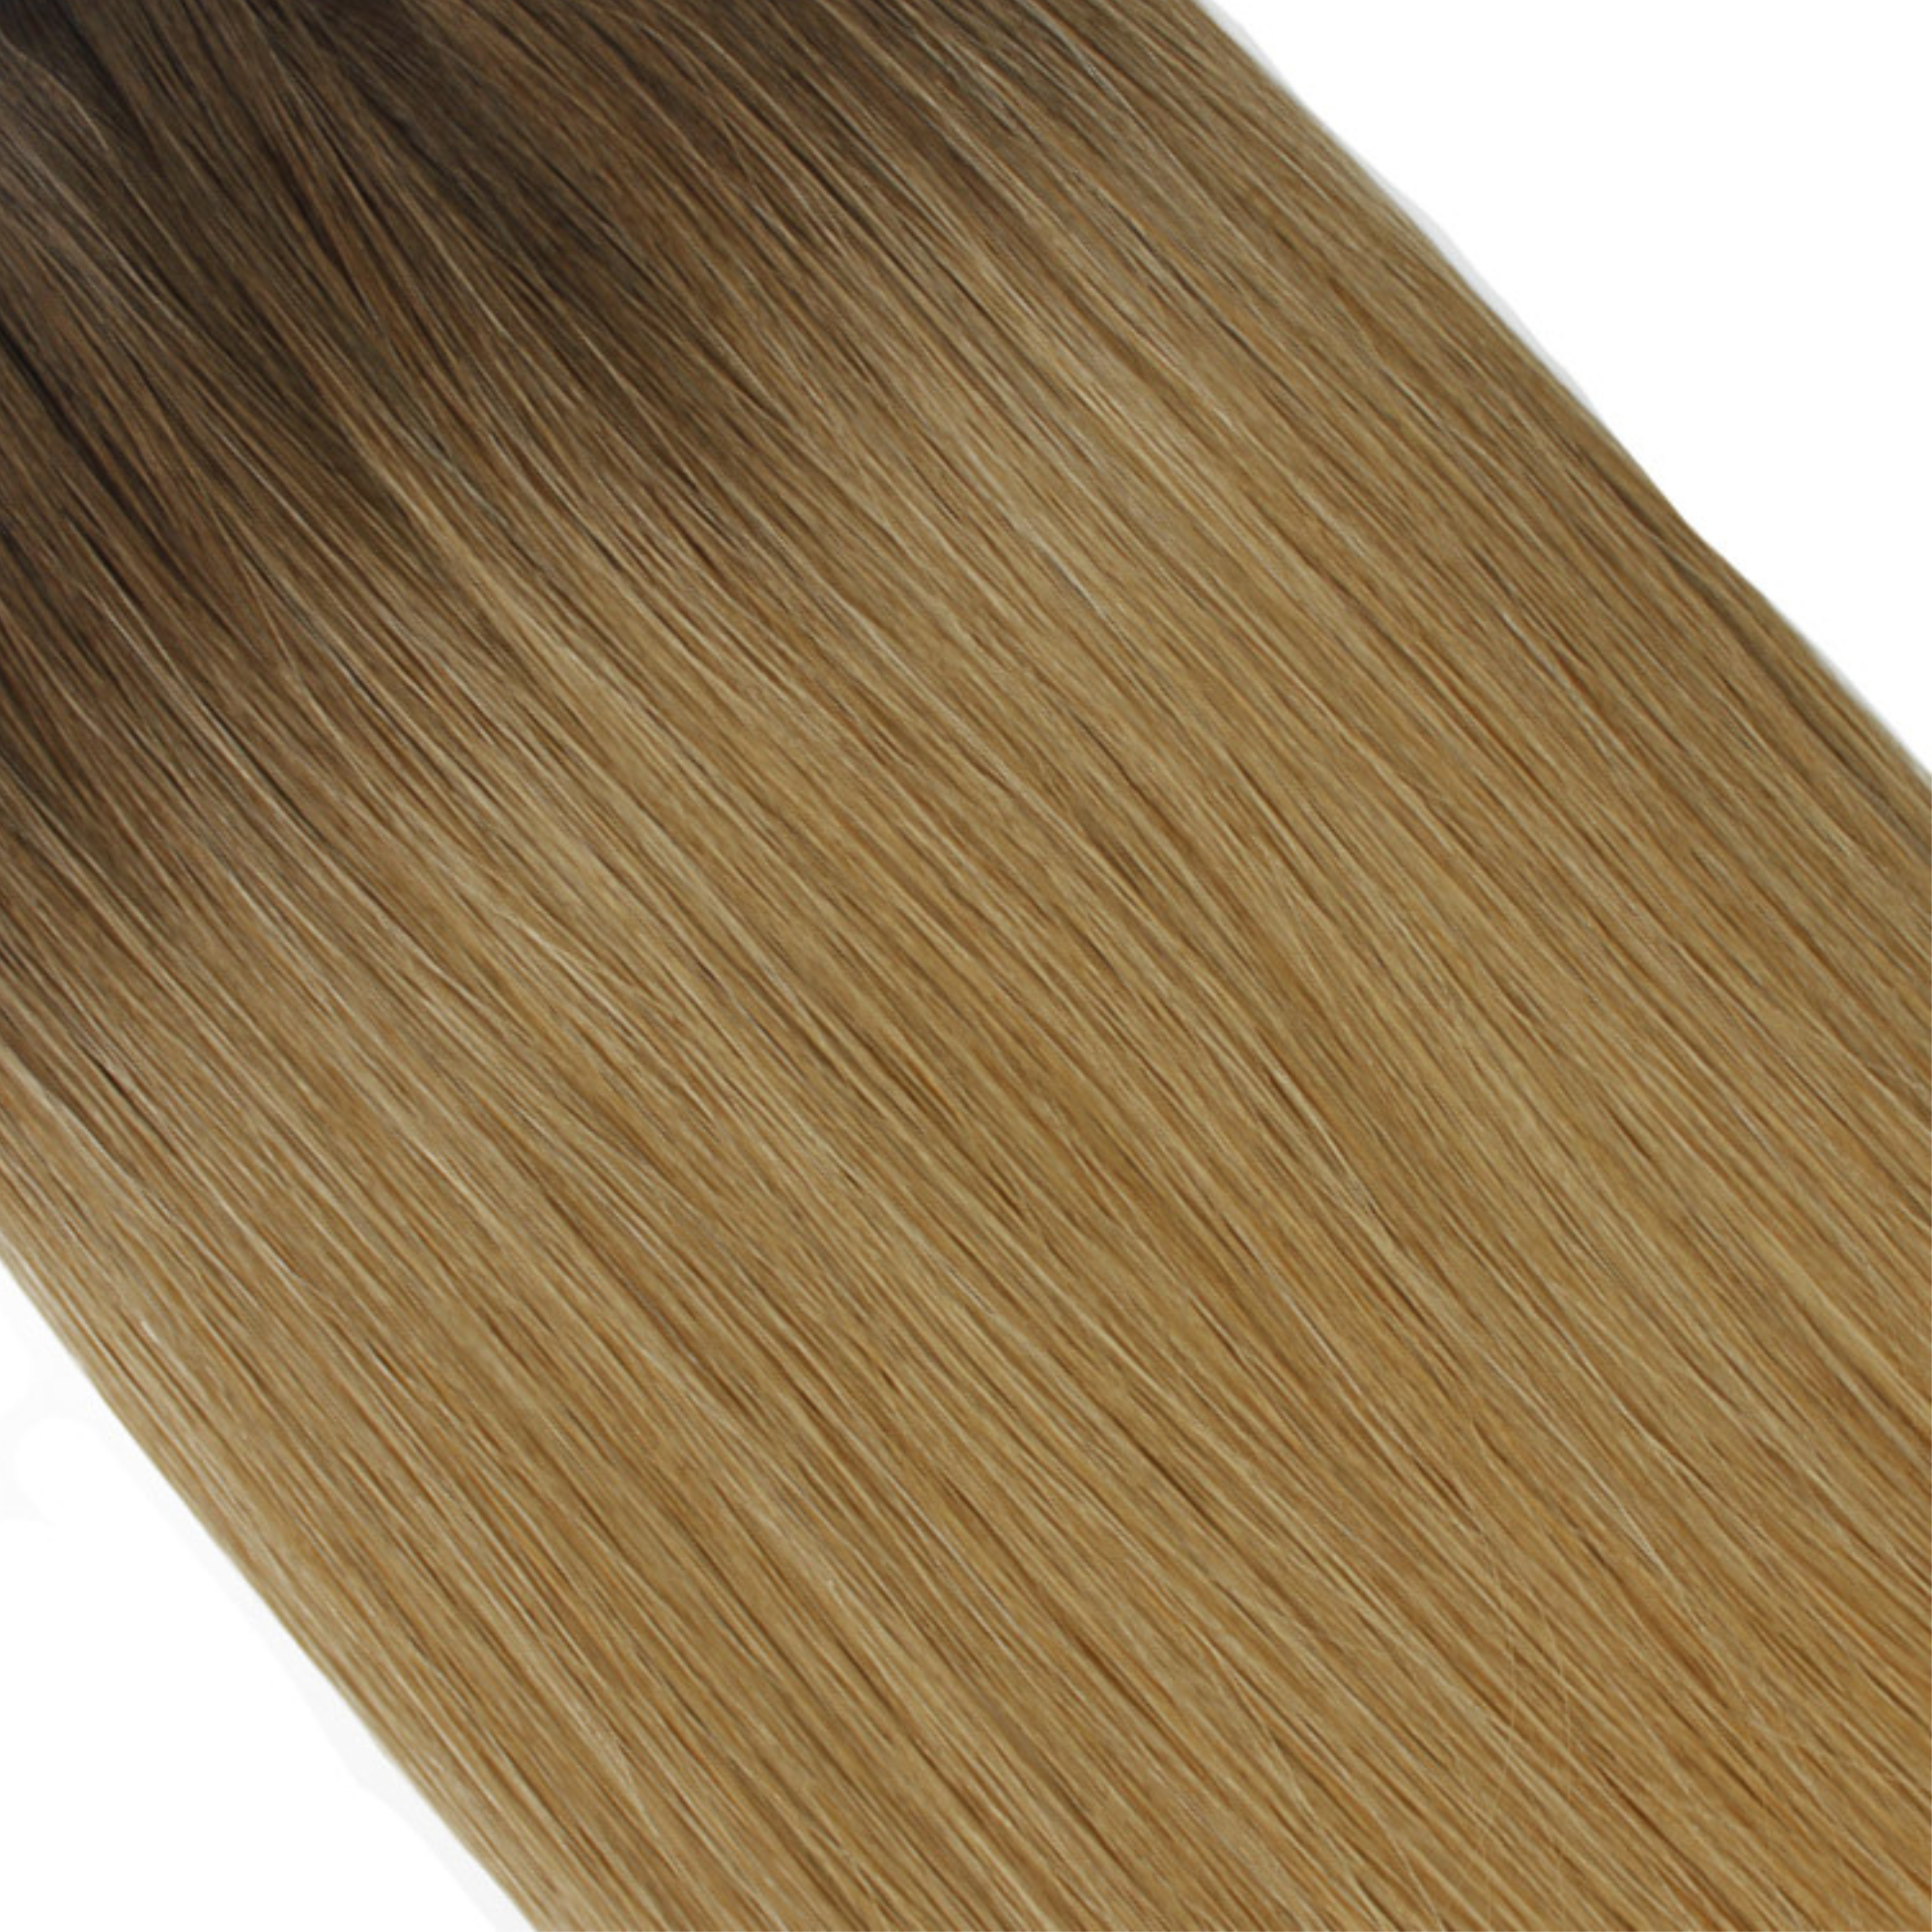 "hair rehab london 22" weft hair extensions shade swatch titled rooted boho"